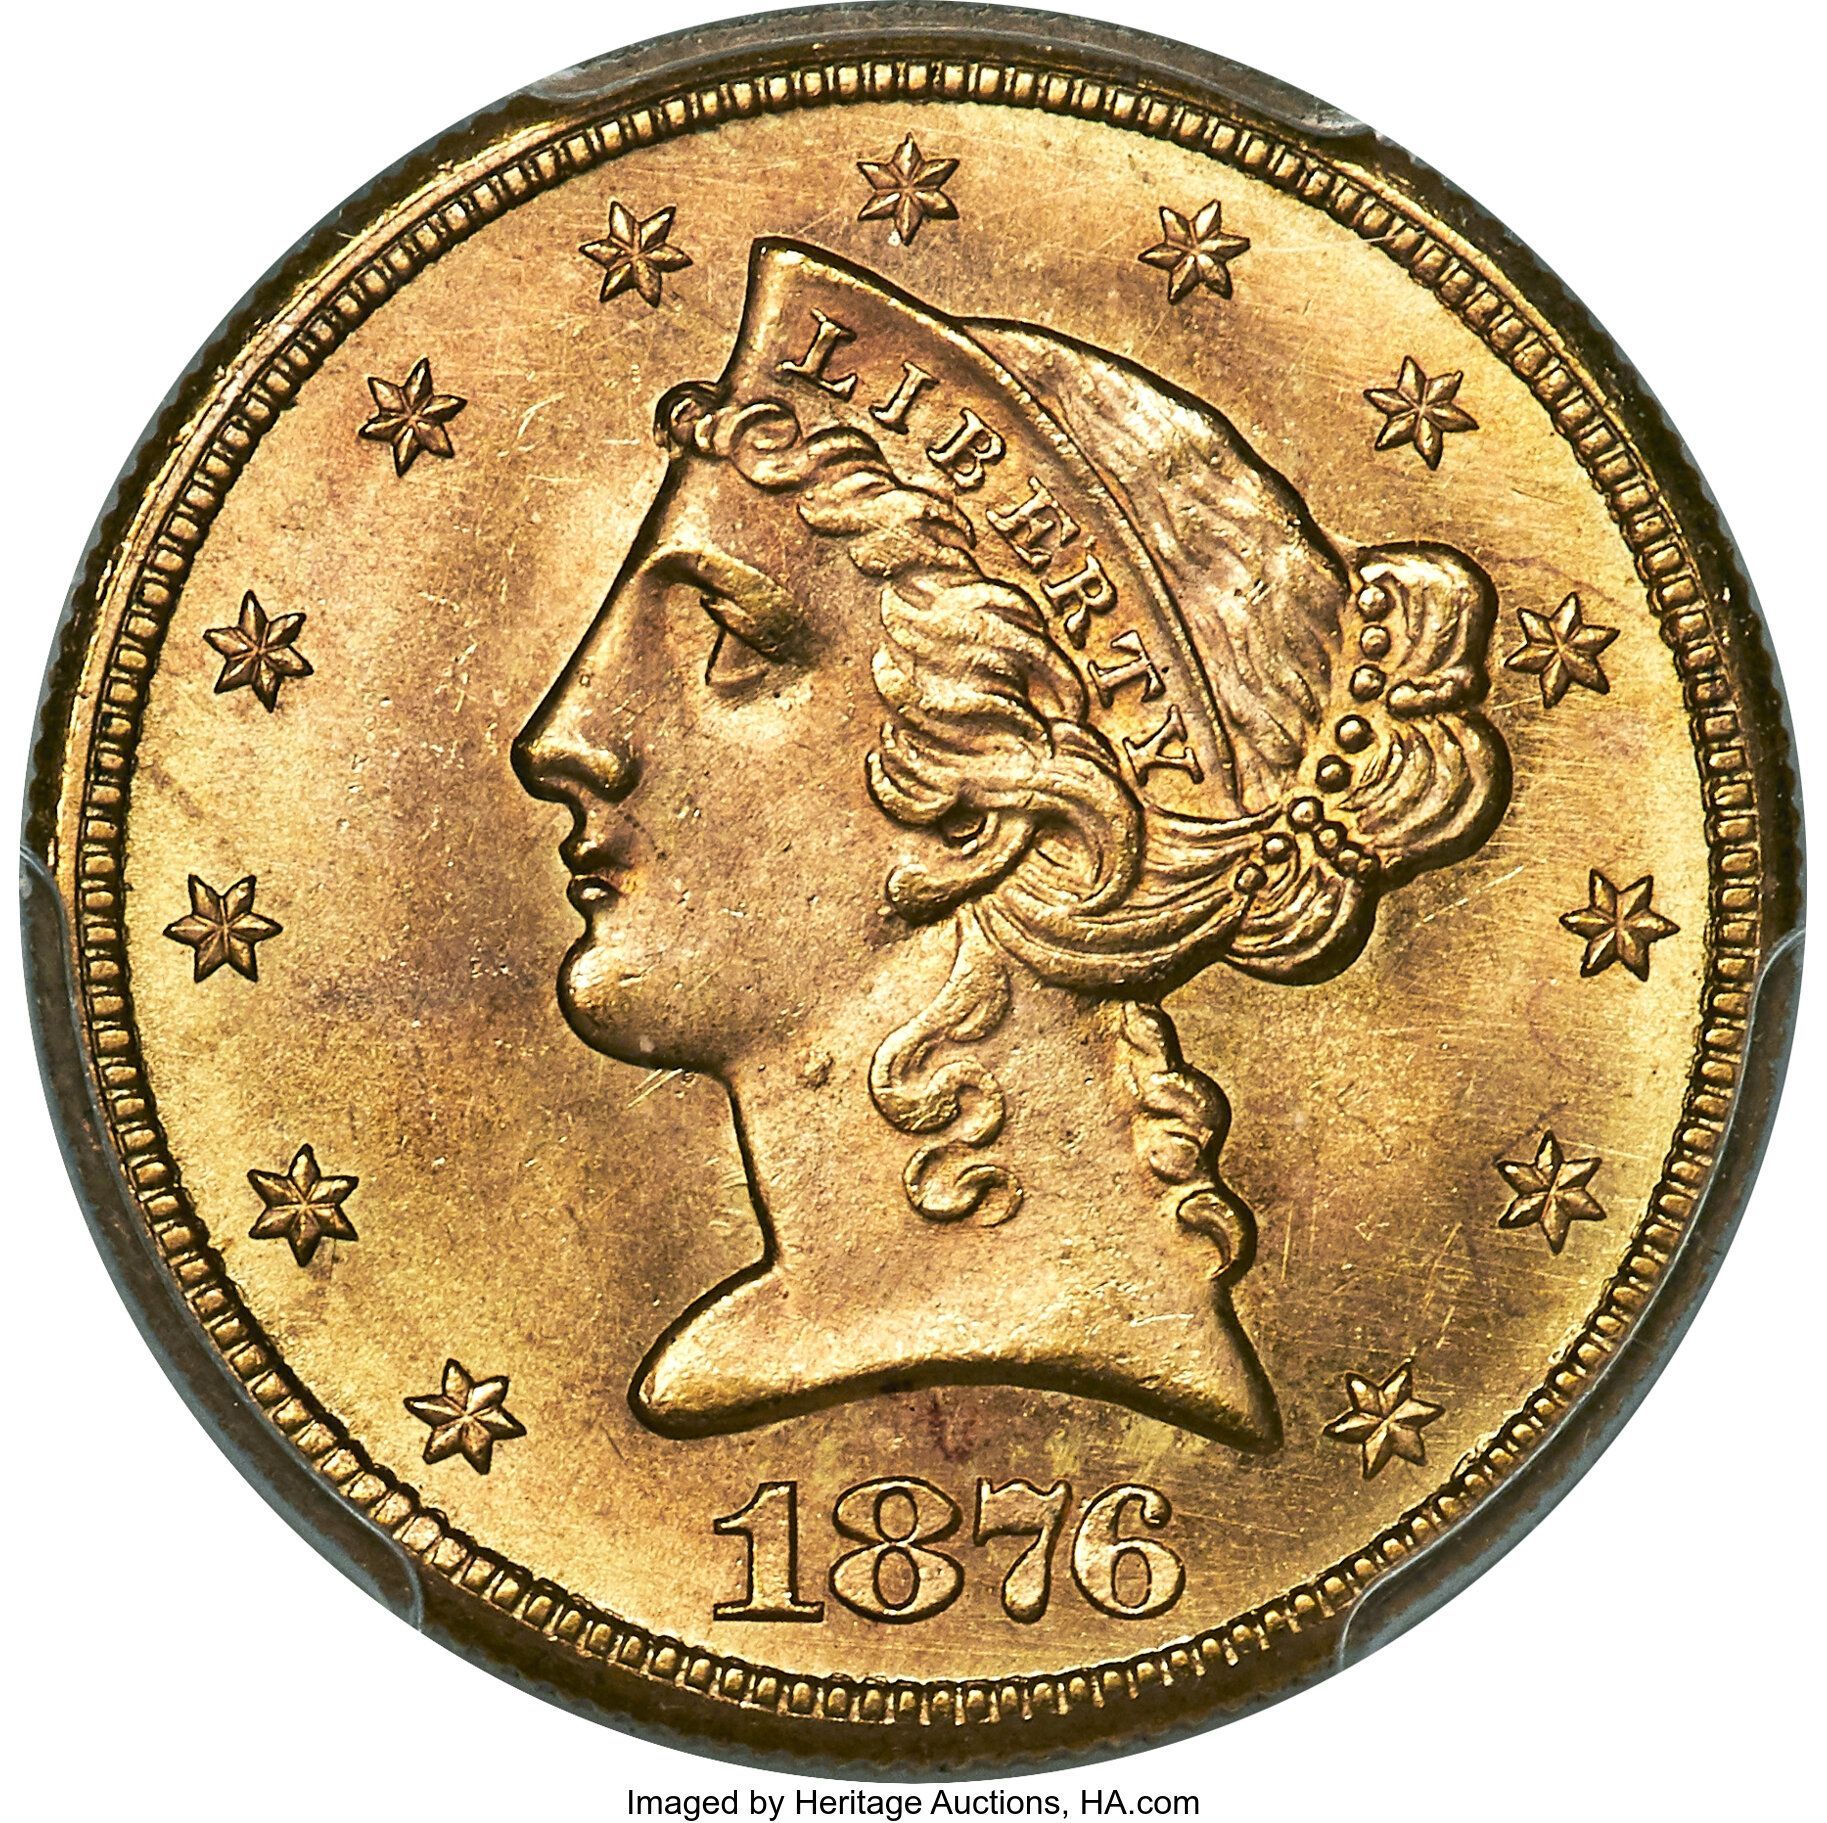 1876 Half Eagle. Imaged by Heritage Auctions, HA.com